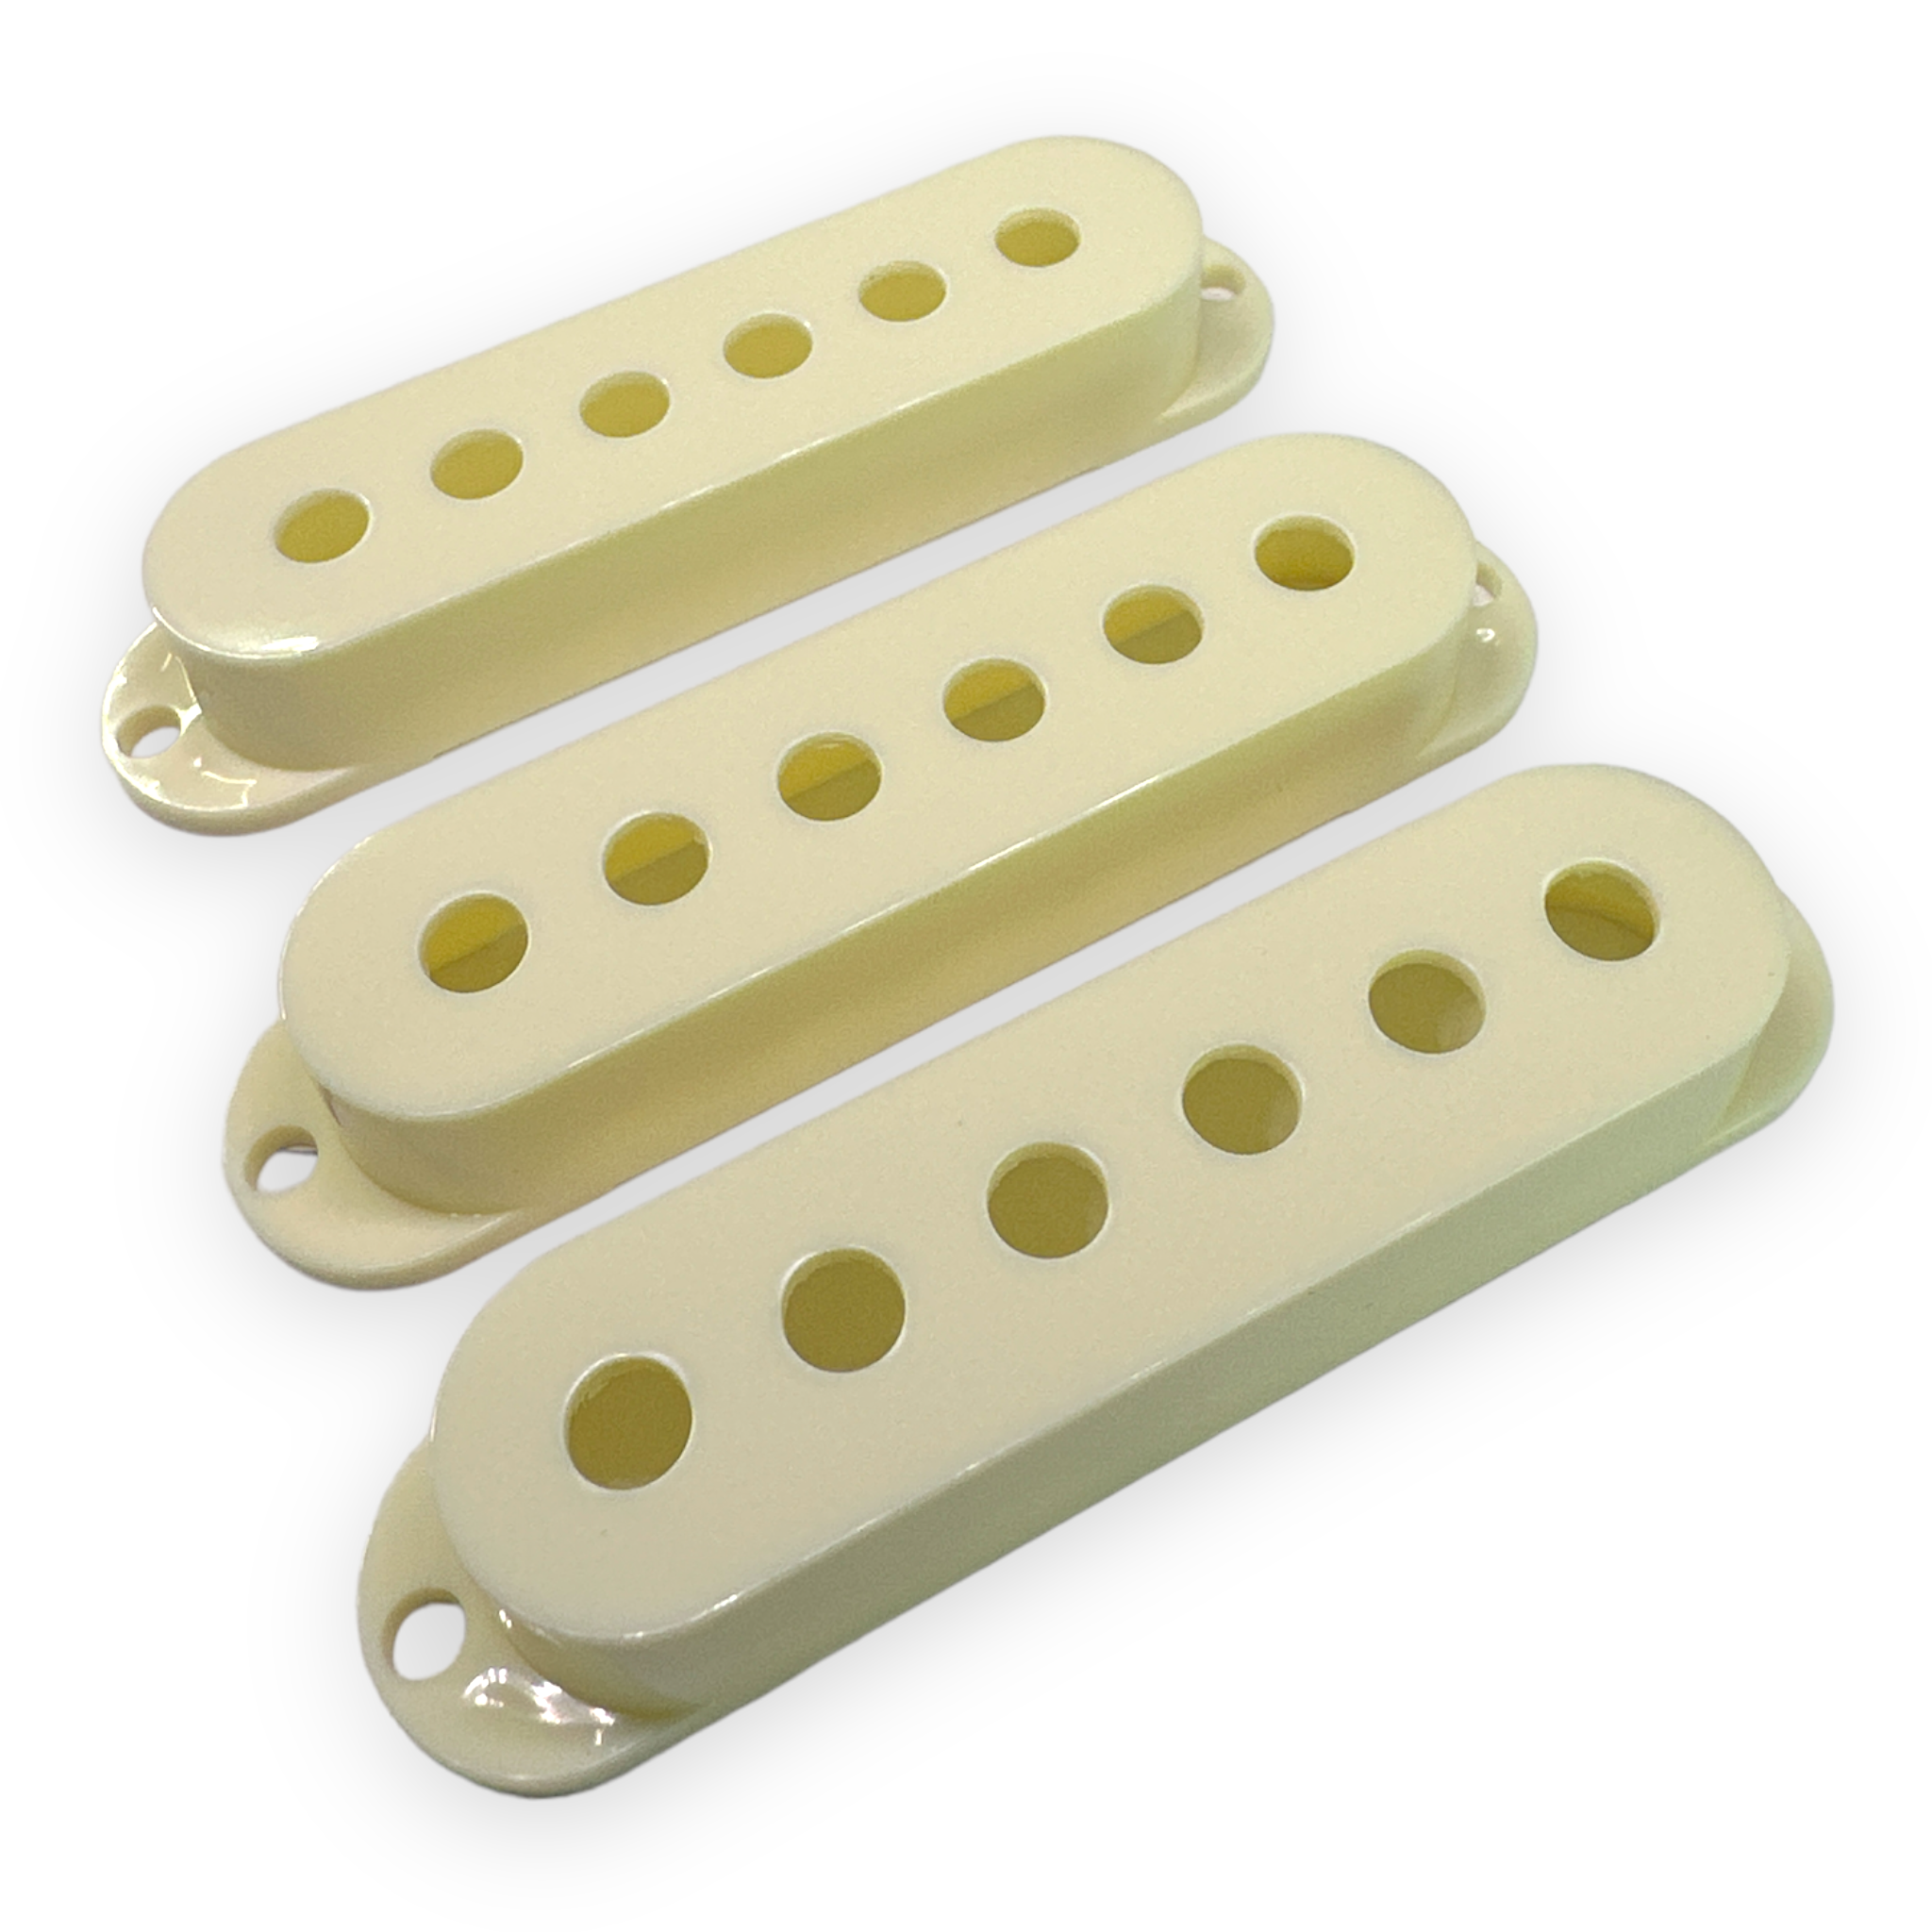 Single Coil Pickup Covers - AxLabs